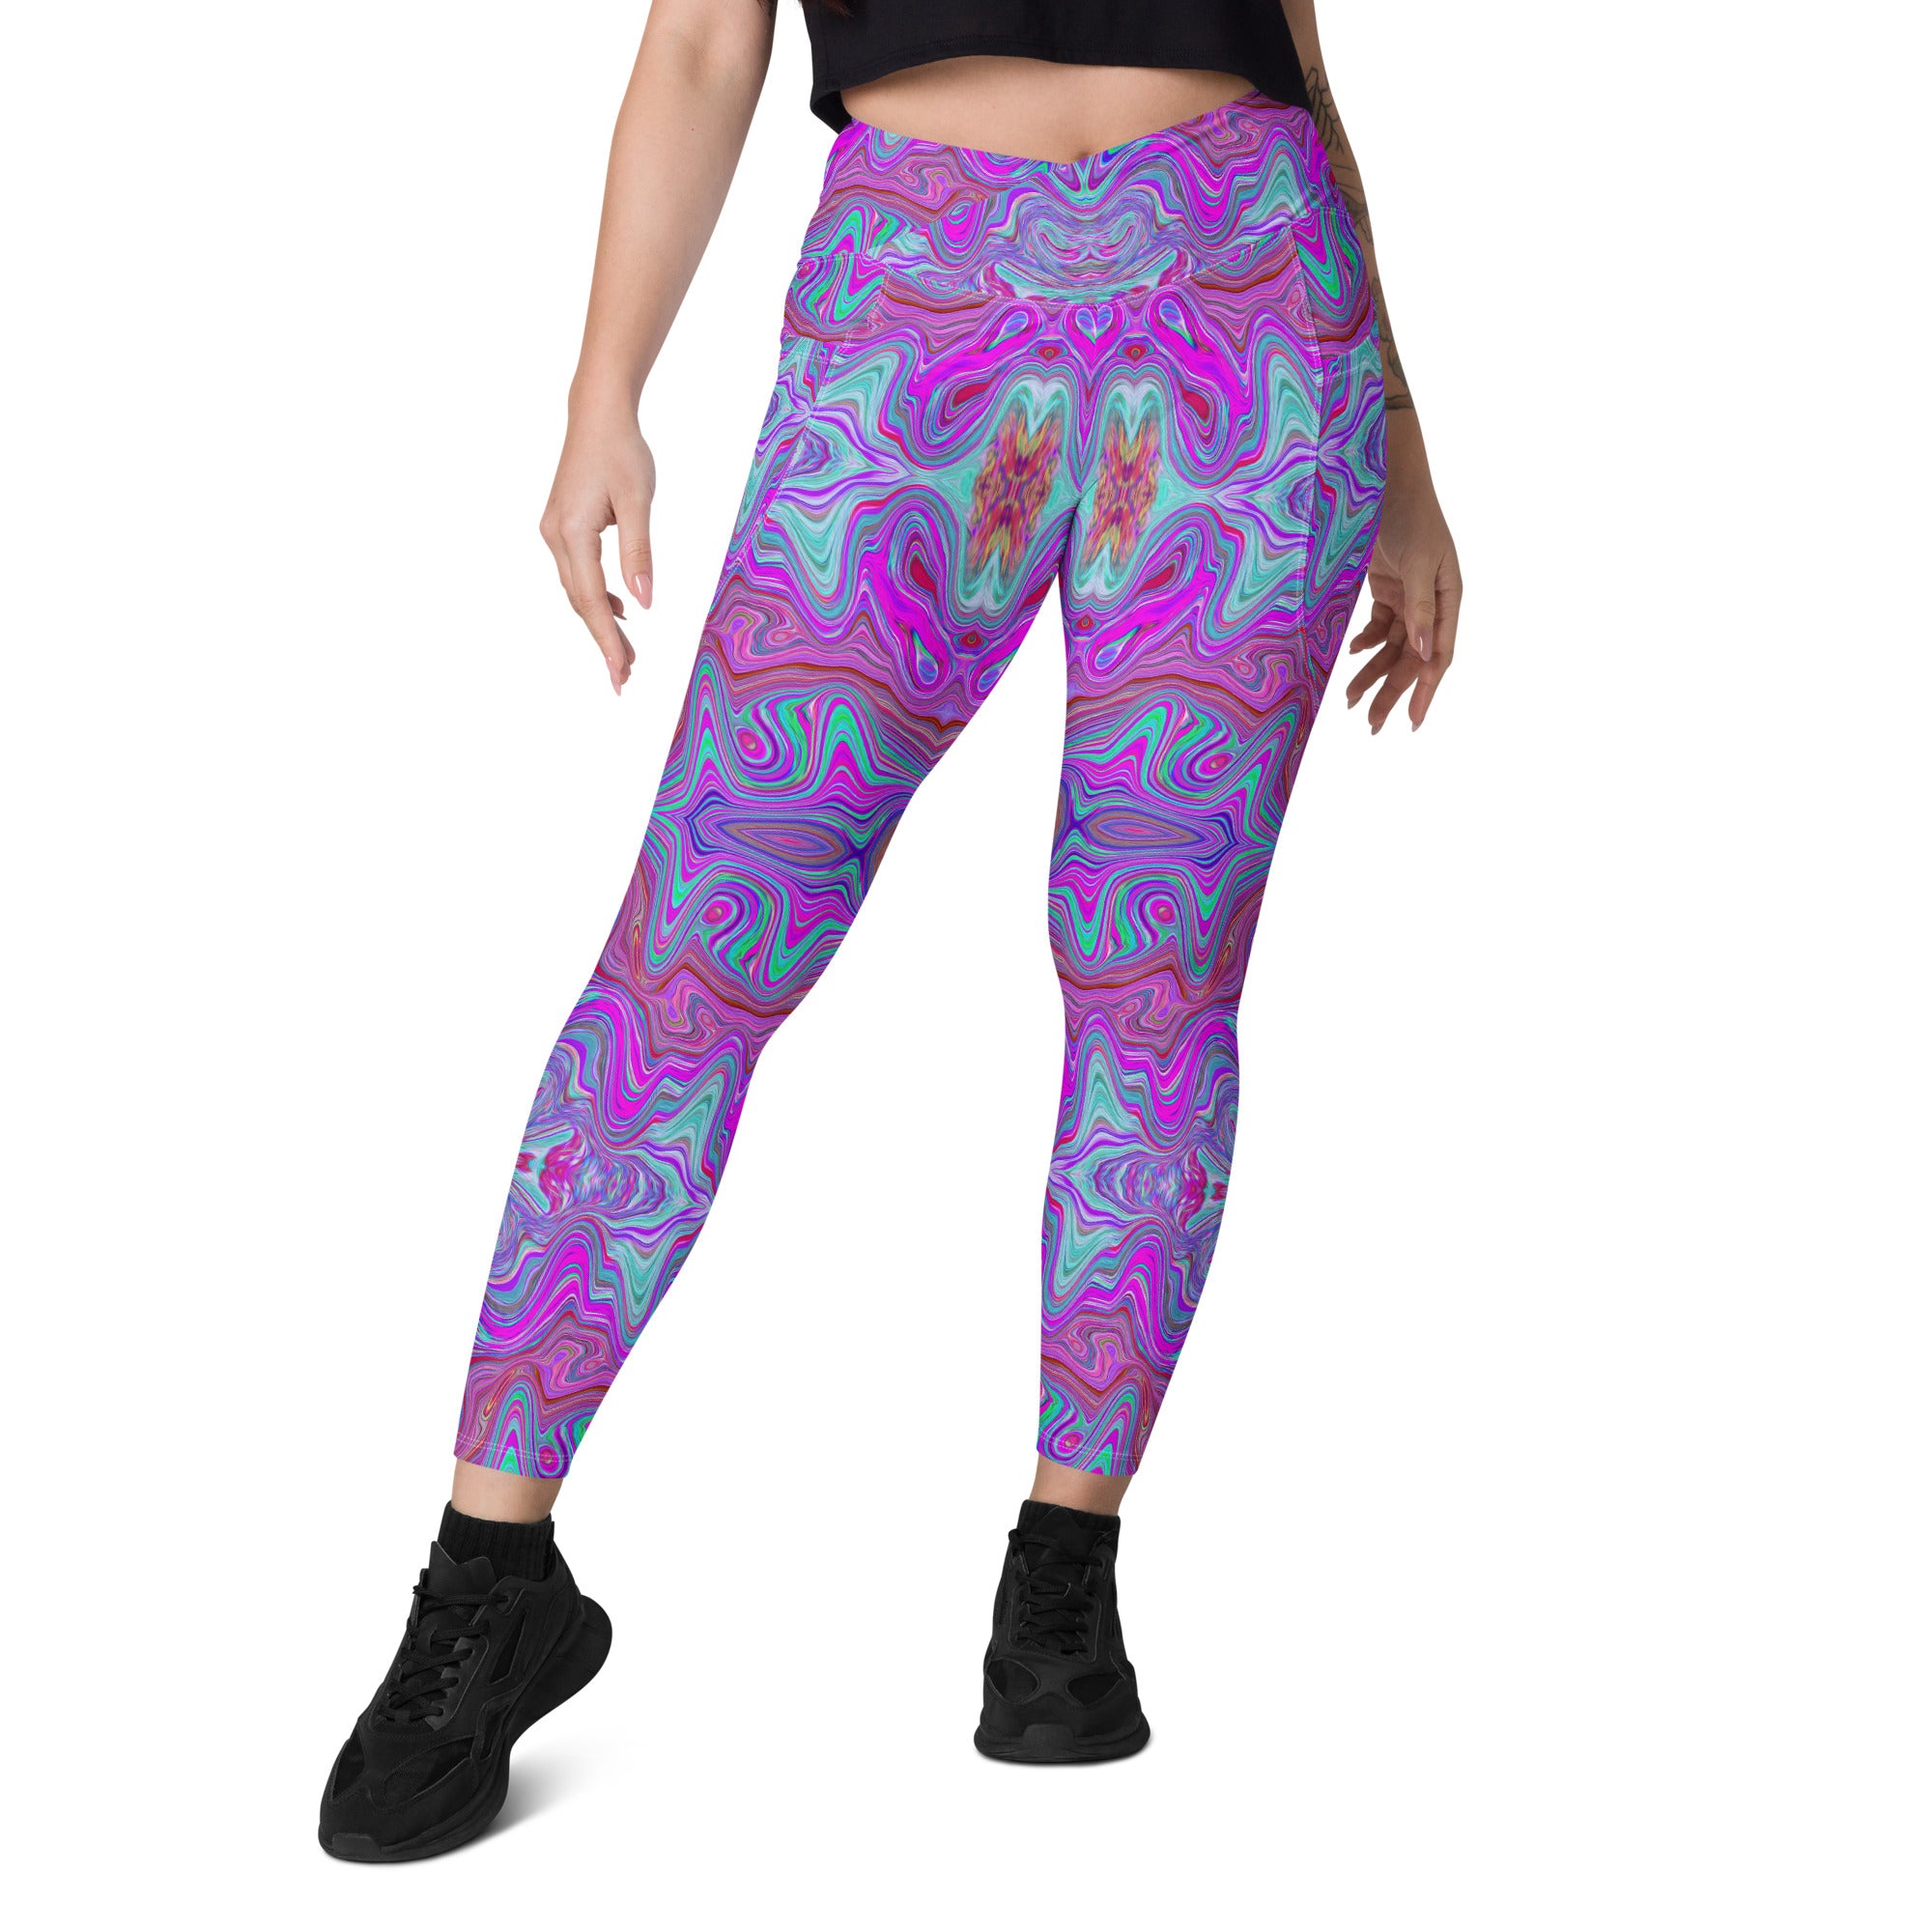 Crossover Leggings, Wavy Magenta and Blue Trippy Marbled Pattern